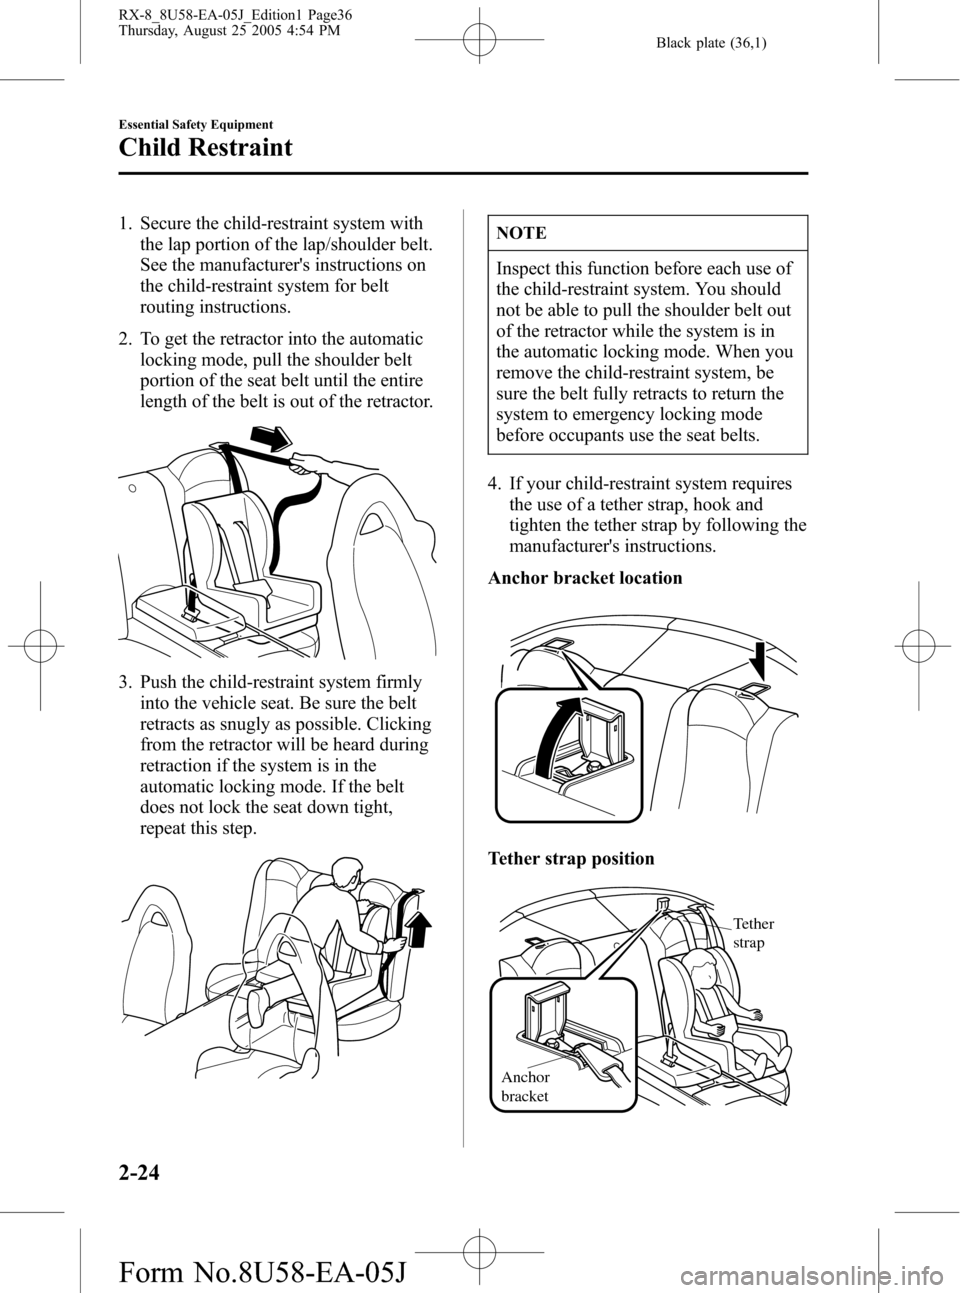 MAZDA MODEL RX 8 2006  Owners Manual (in English) Black plate (36,1)
1. Secure the child-restraint system with
the lap portion of the lap/shoulder belt.
See the manufacturers instructions on
the child-restraint system for belt
routing instructions.
